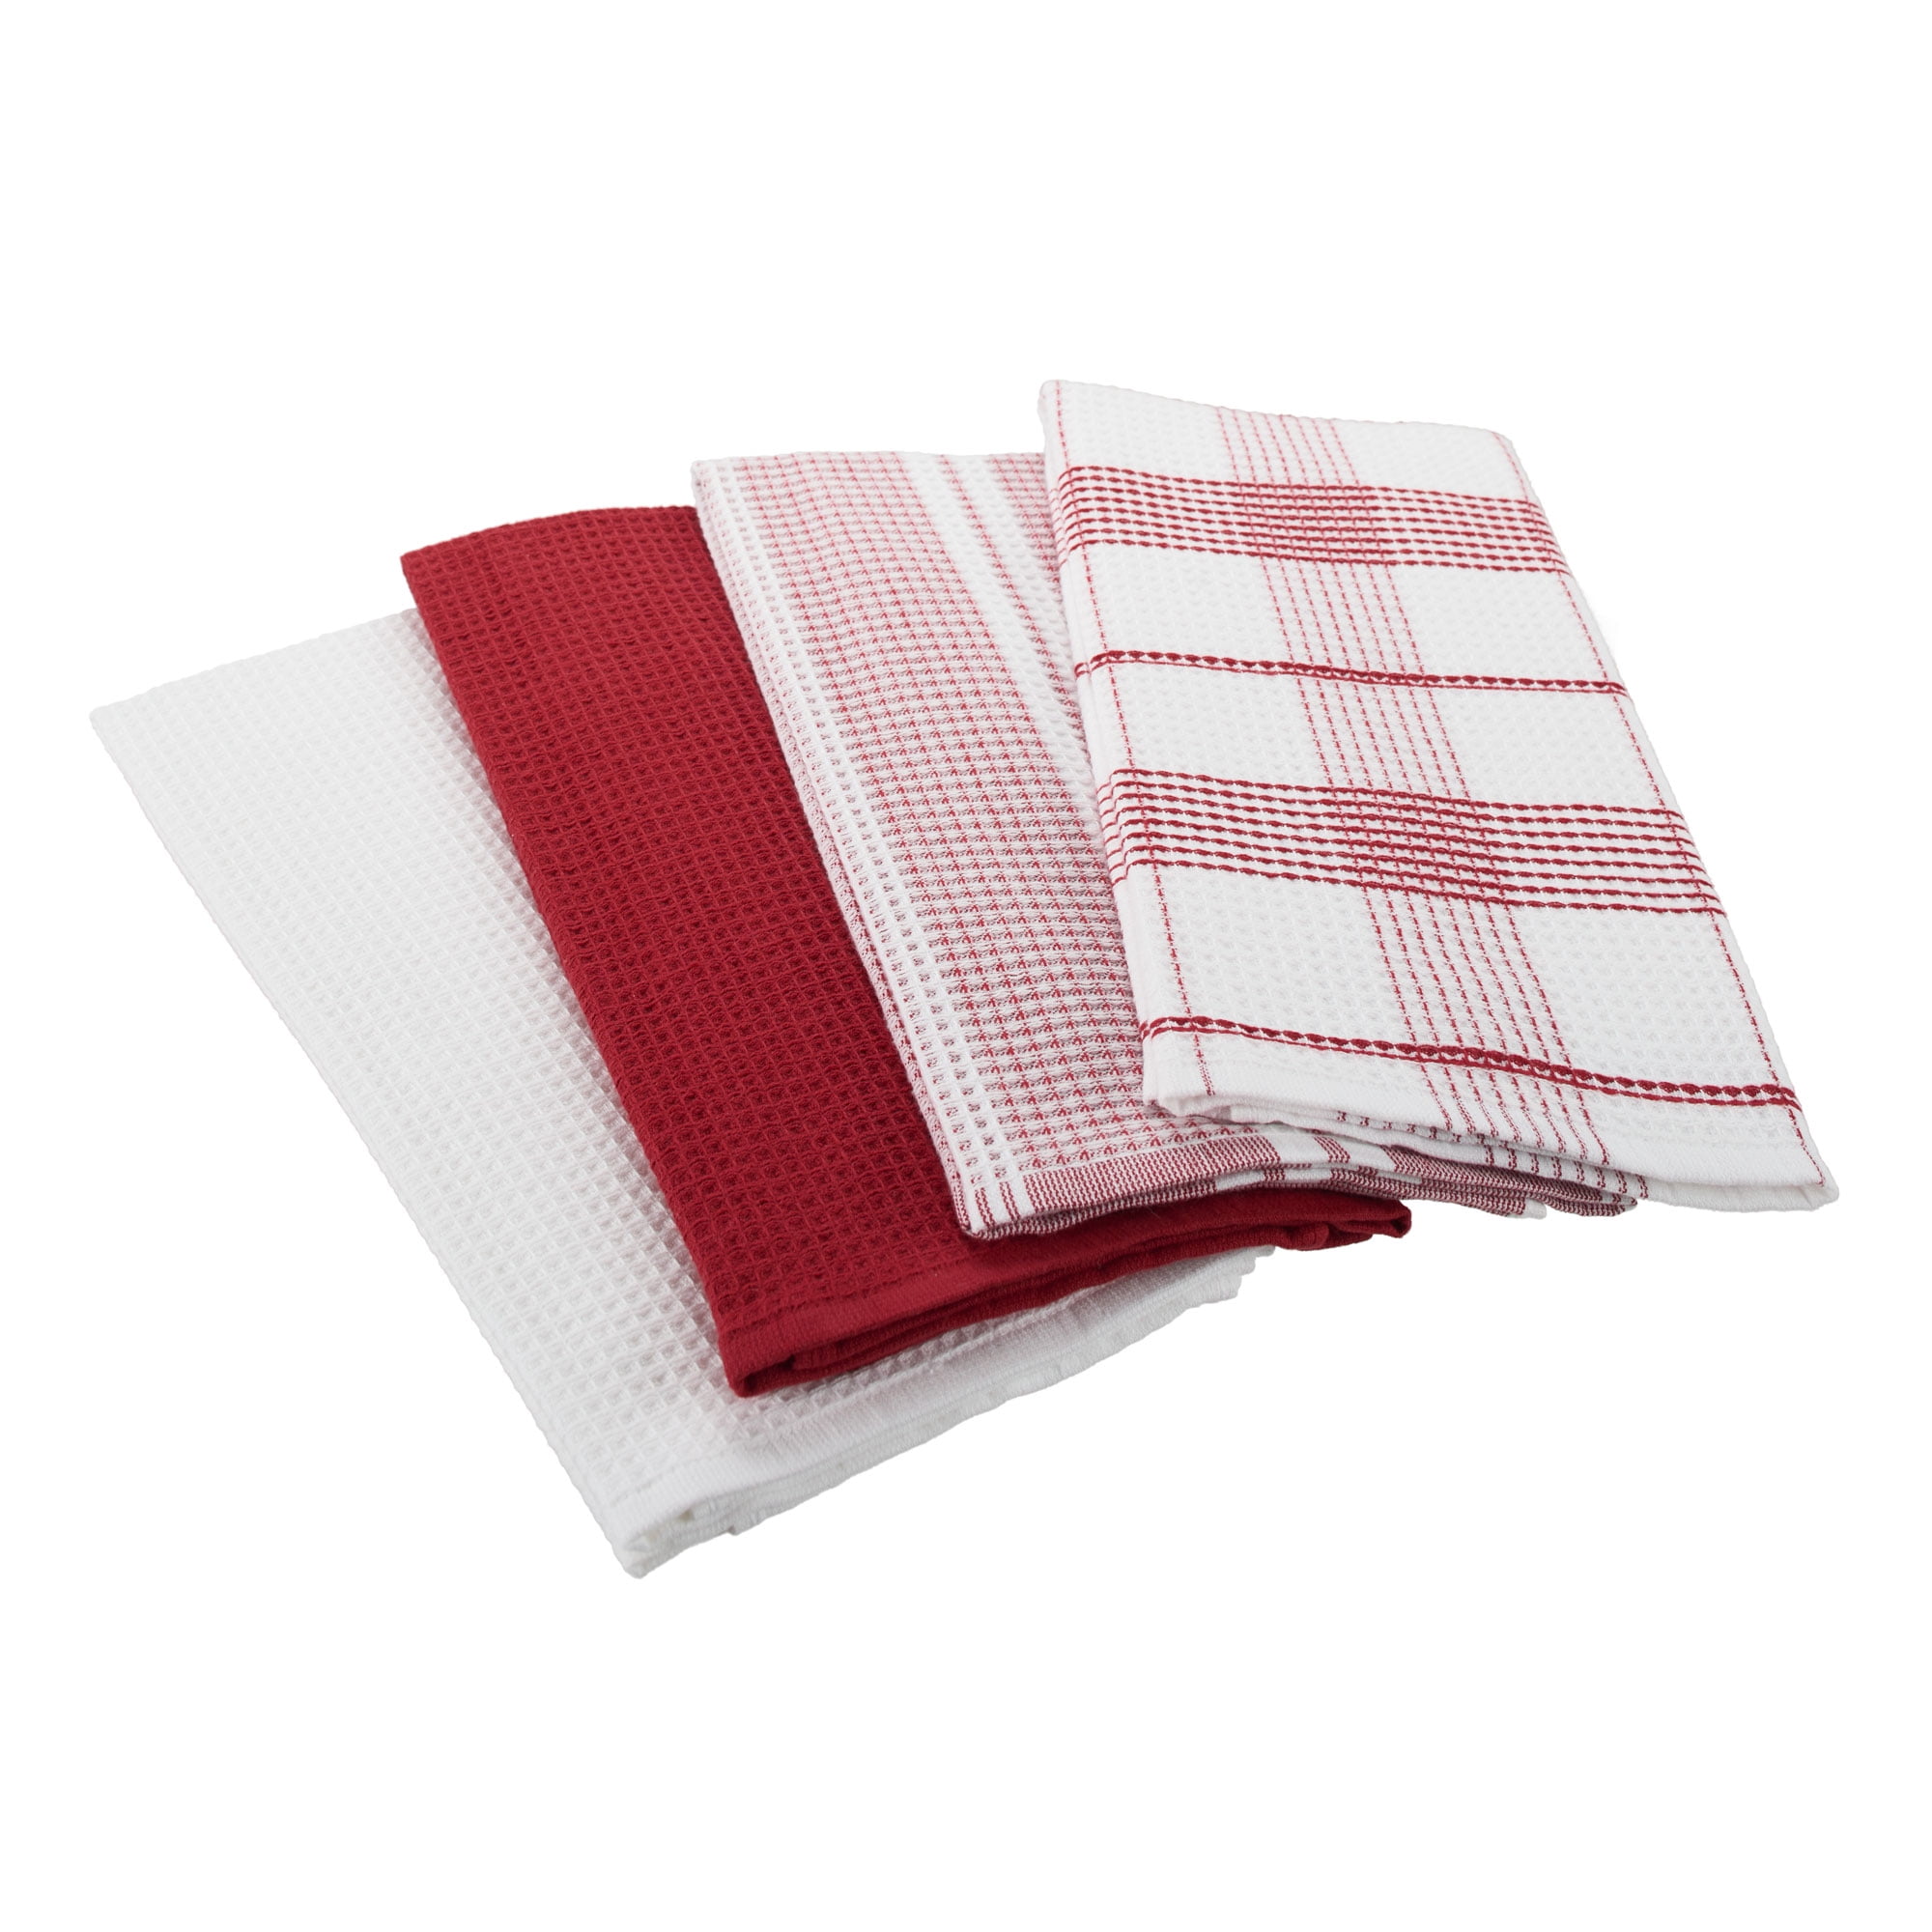 Red and Ivory Kitchen Towels, Set of 2 Kitchen Towels, Hand Towel, Kitchen  Decor, August Ave, Tea Towel, Kitchen, Red and Cream Ivory 